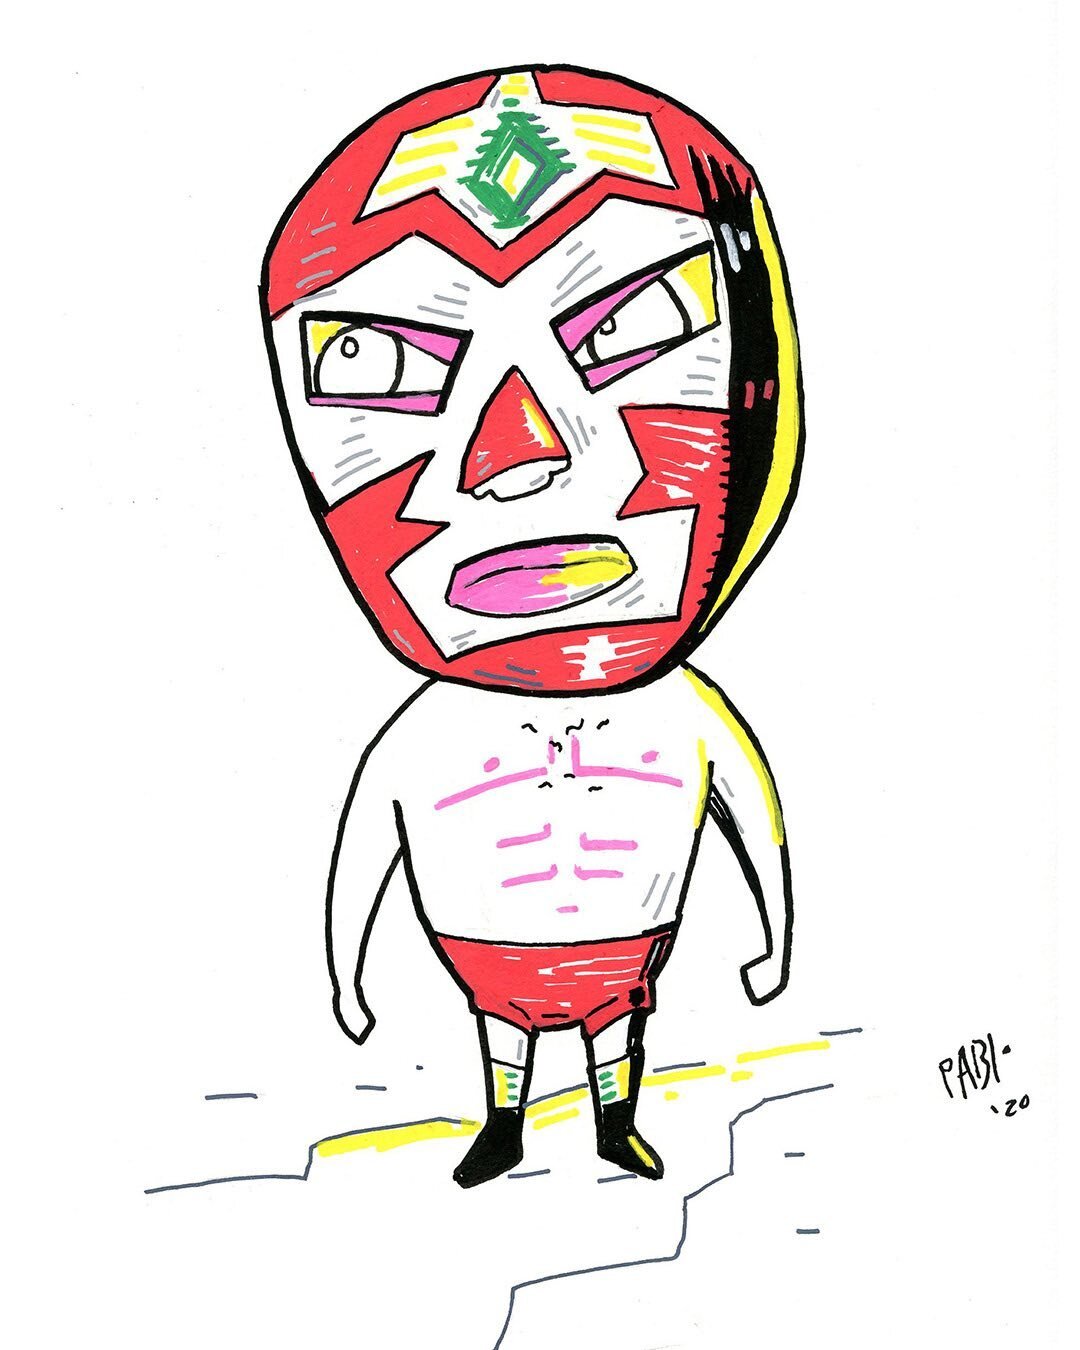 Lucha The Red Mask - acrylic pens on paper #lucha #luchadors #drawing #hand drawn #mexican wrestler